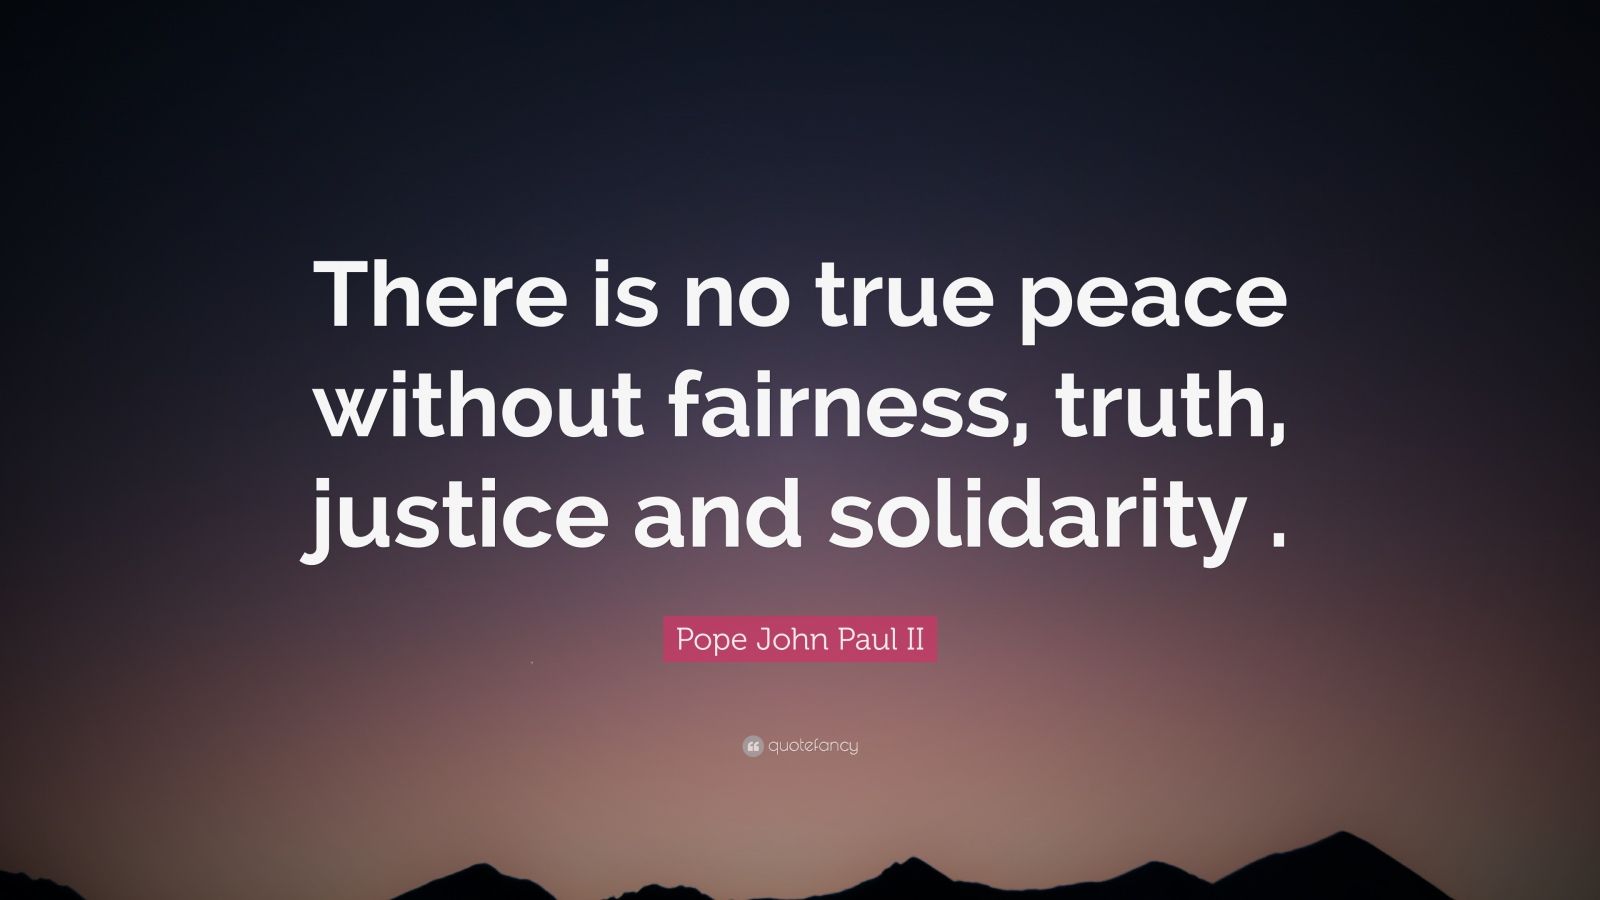 Pope John Paul II Quote: “There is no true peace without fairness